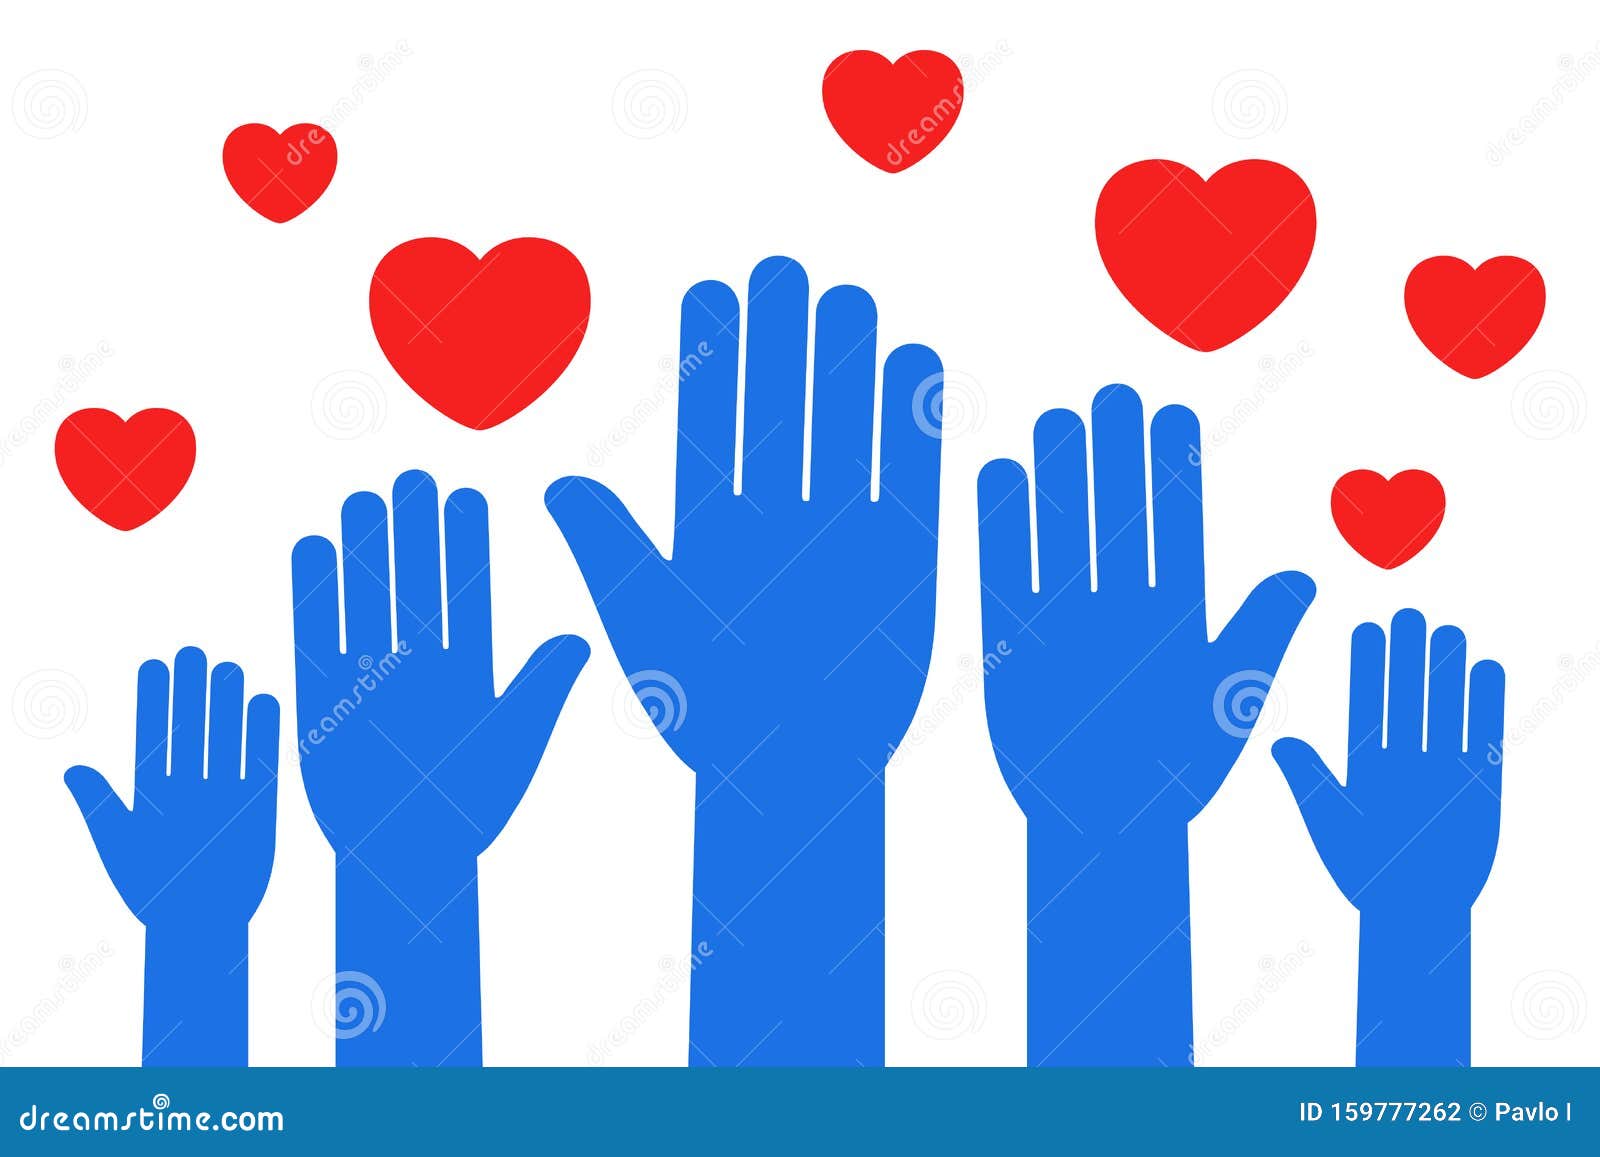 set hands with hearts, charity work icon, organization of volunteers, raised helping hands, family community - 